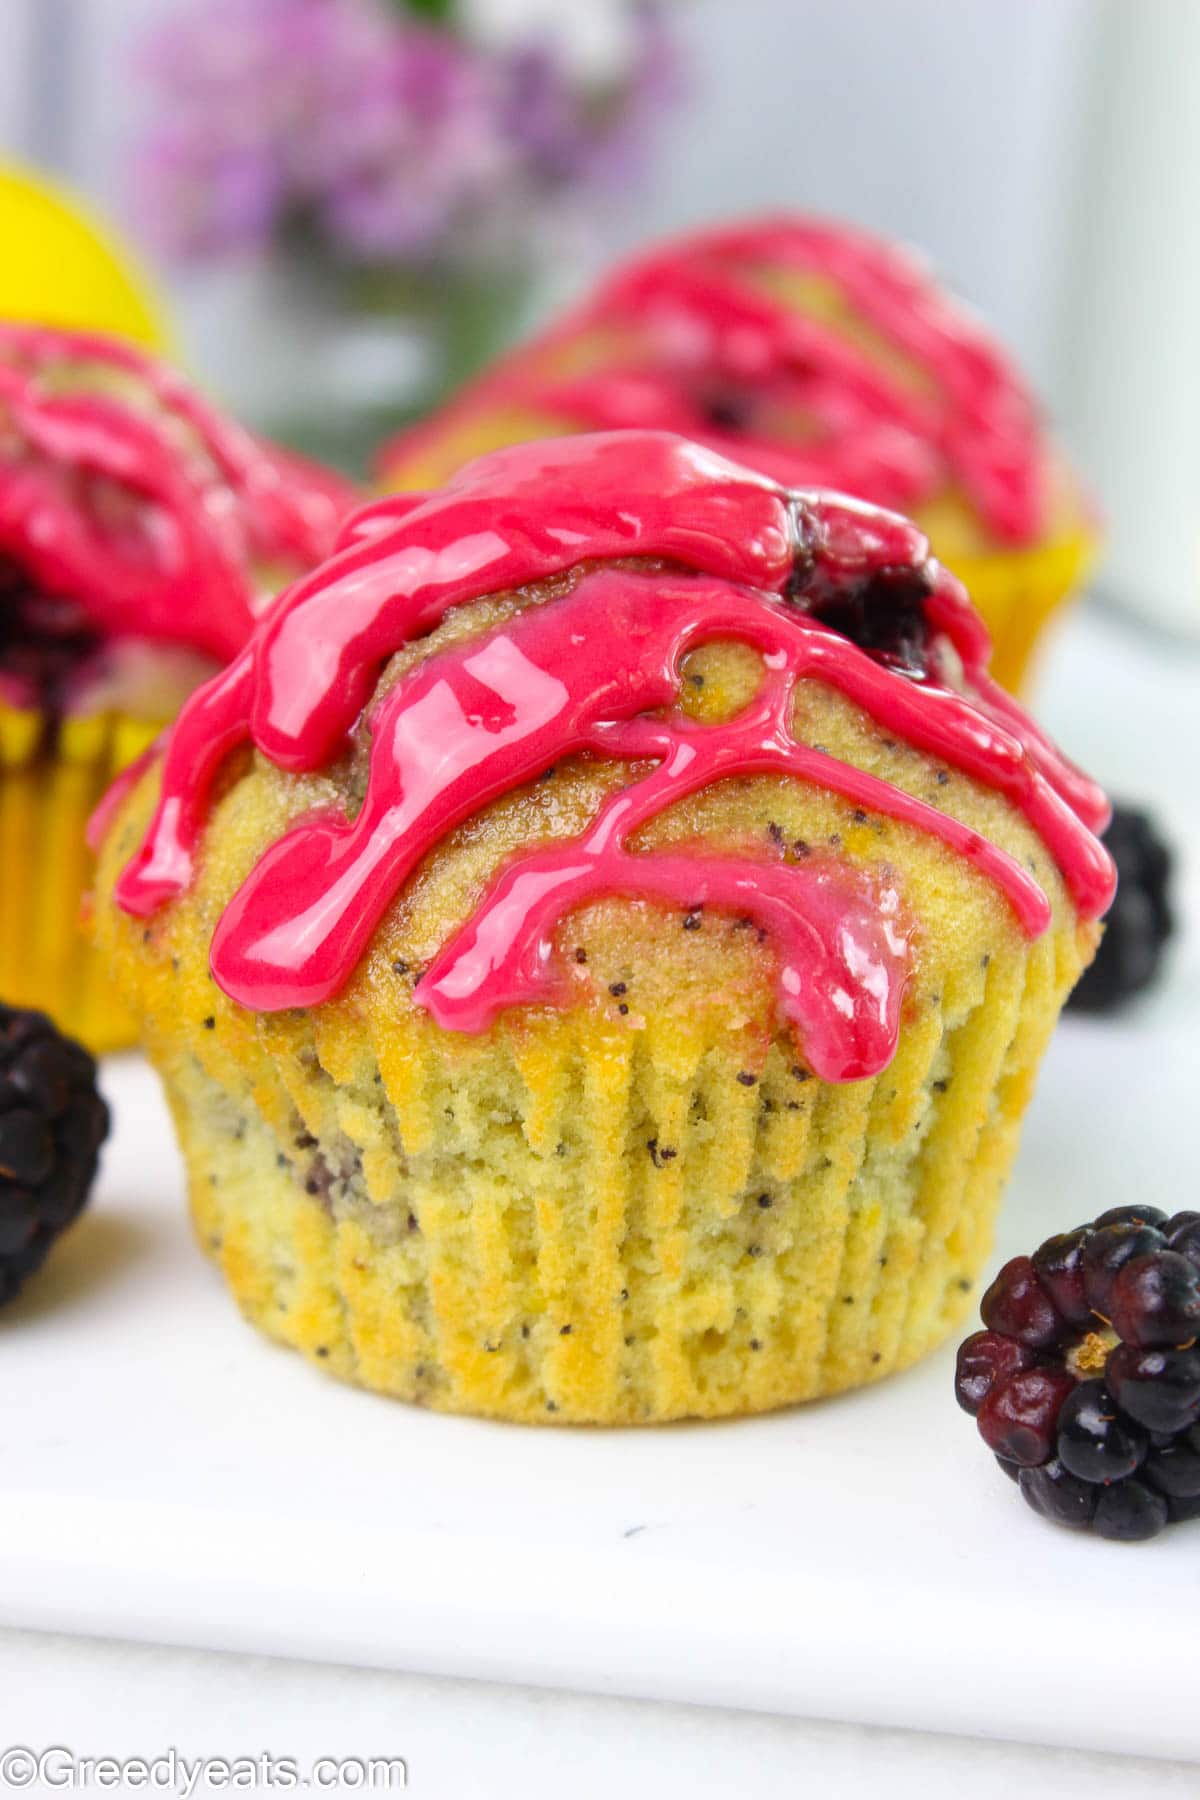 Thick and fruity berry glaze sitting on Lemon Muffins recipe, dotted with berries and poppyseeds.